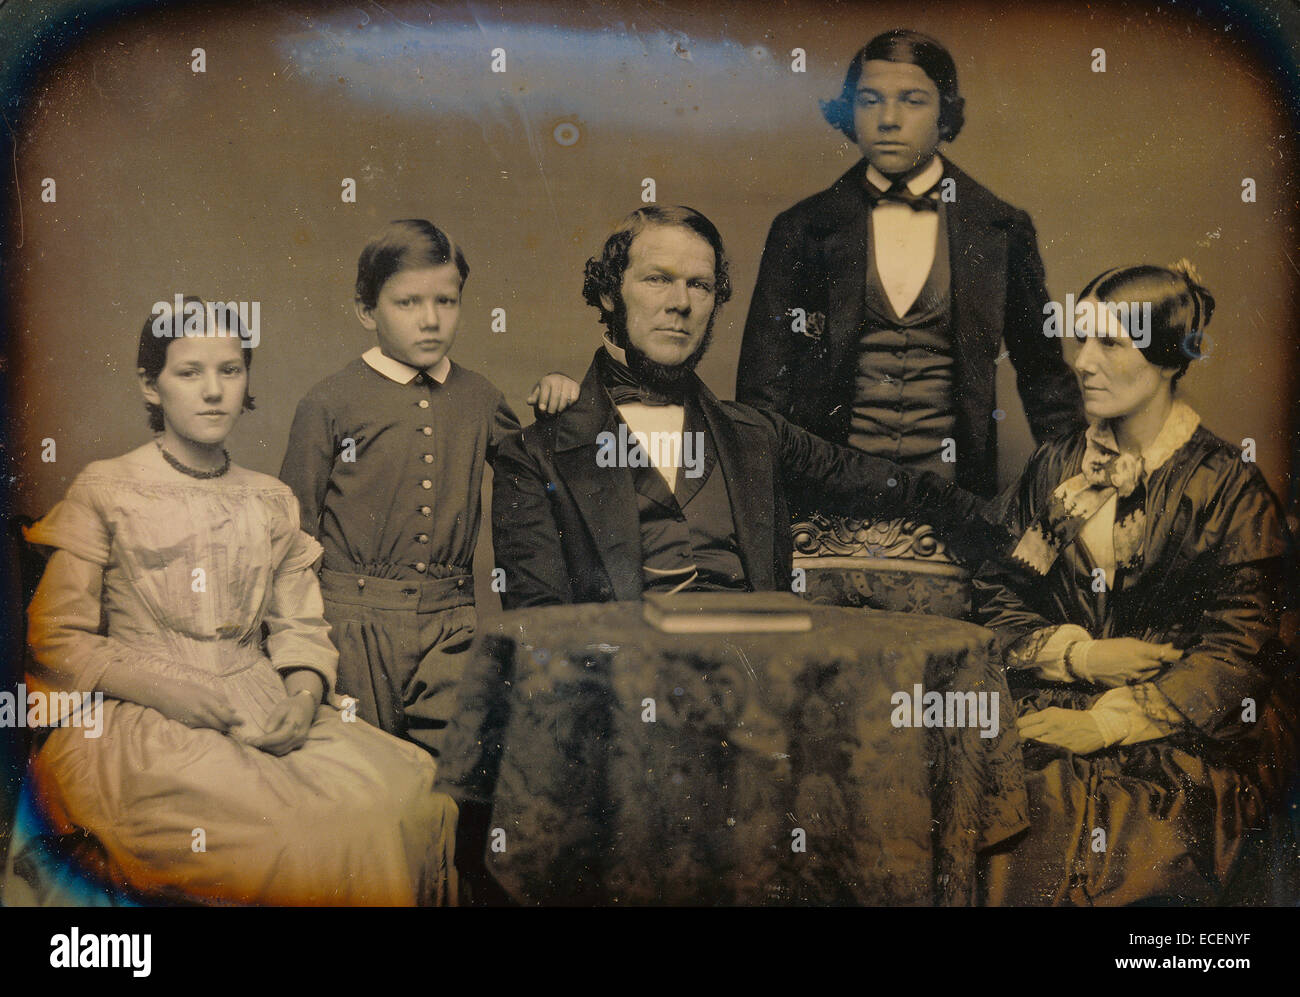 Family portrait; Unknown maker, American; 1850 - 1855; Daguerreotype; Whole plate, Image: 13 x 17.8 cm (5 1/8 x 7 in.) Stock Photo